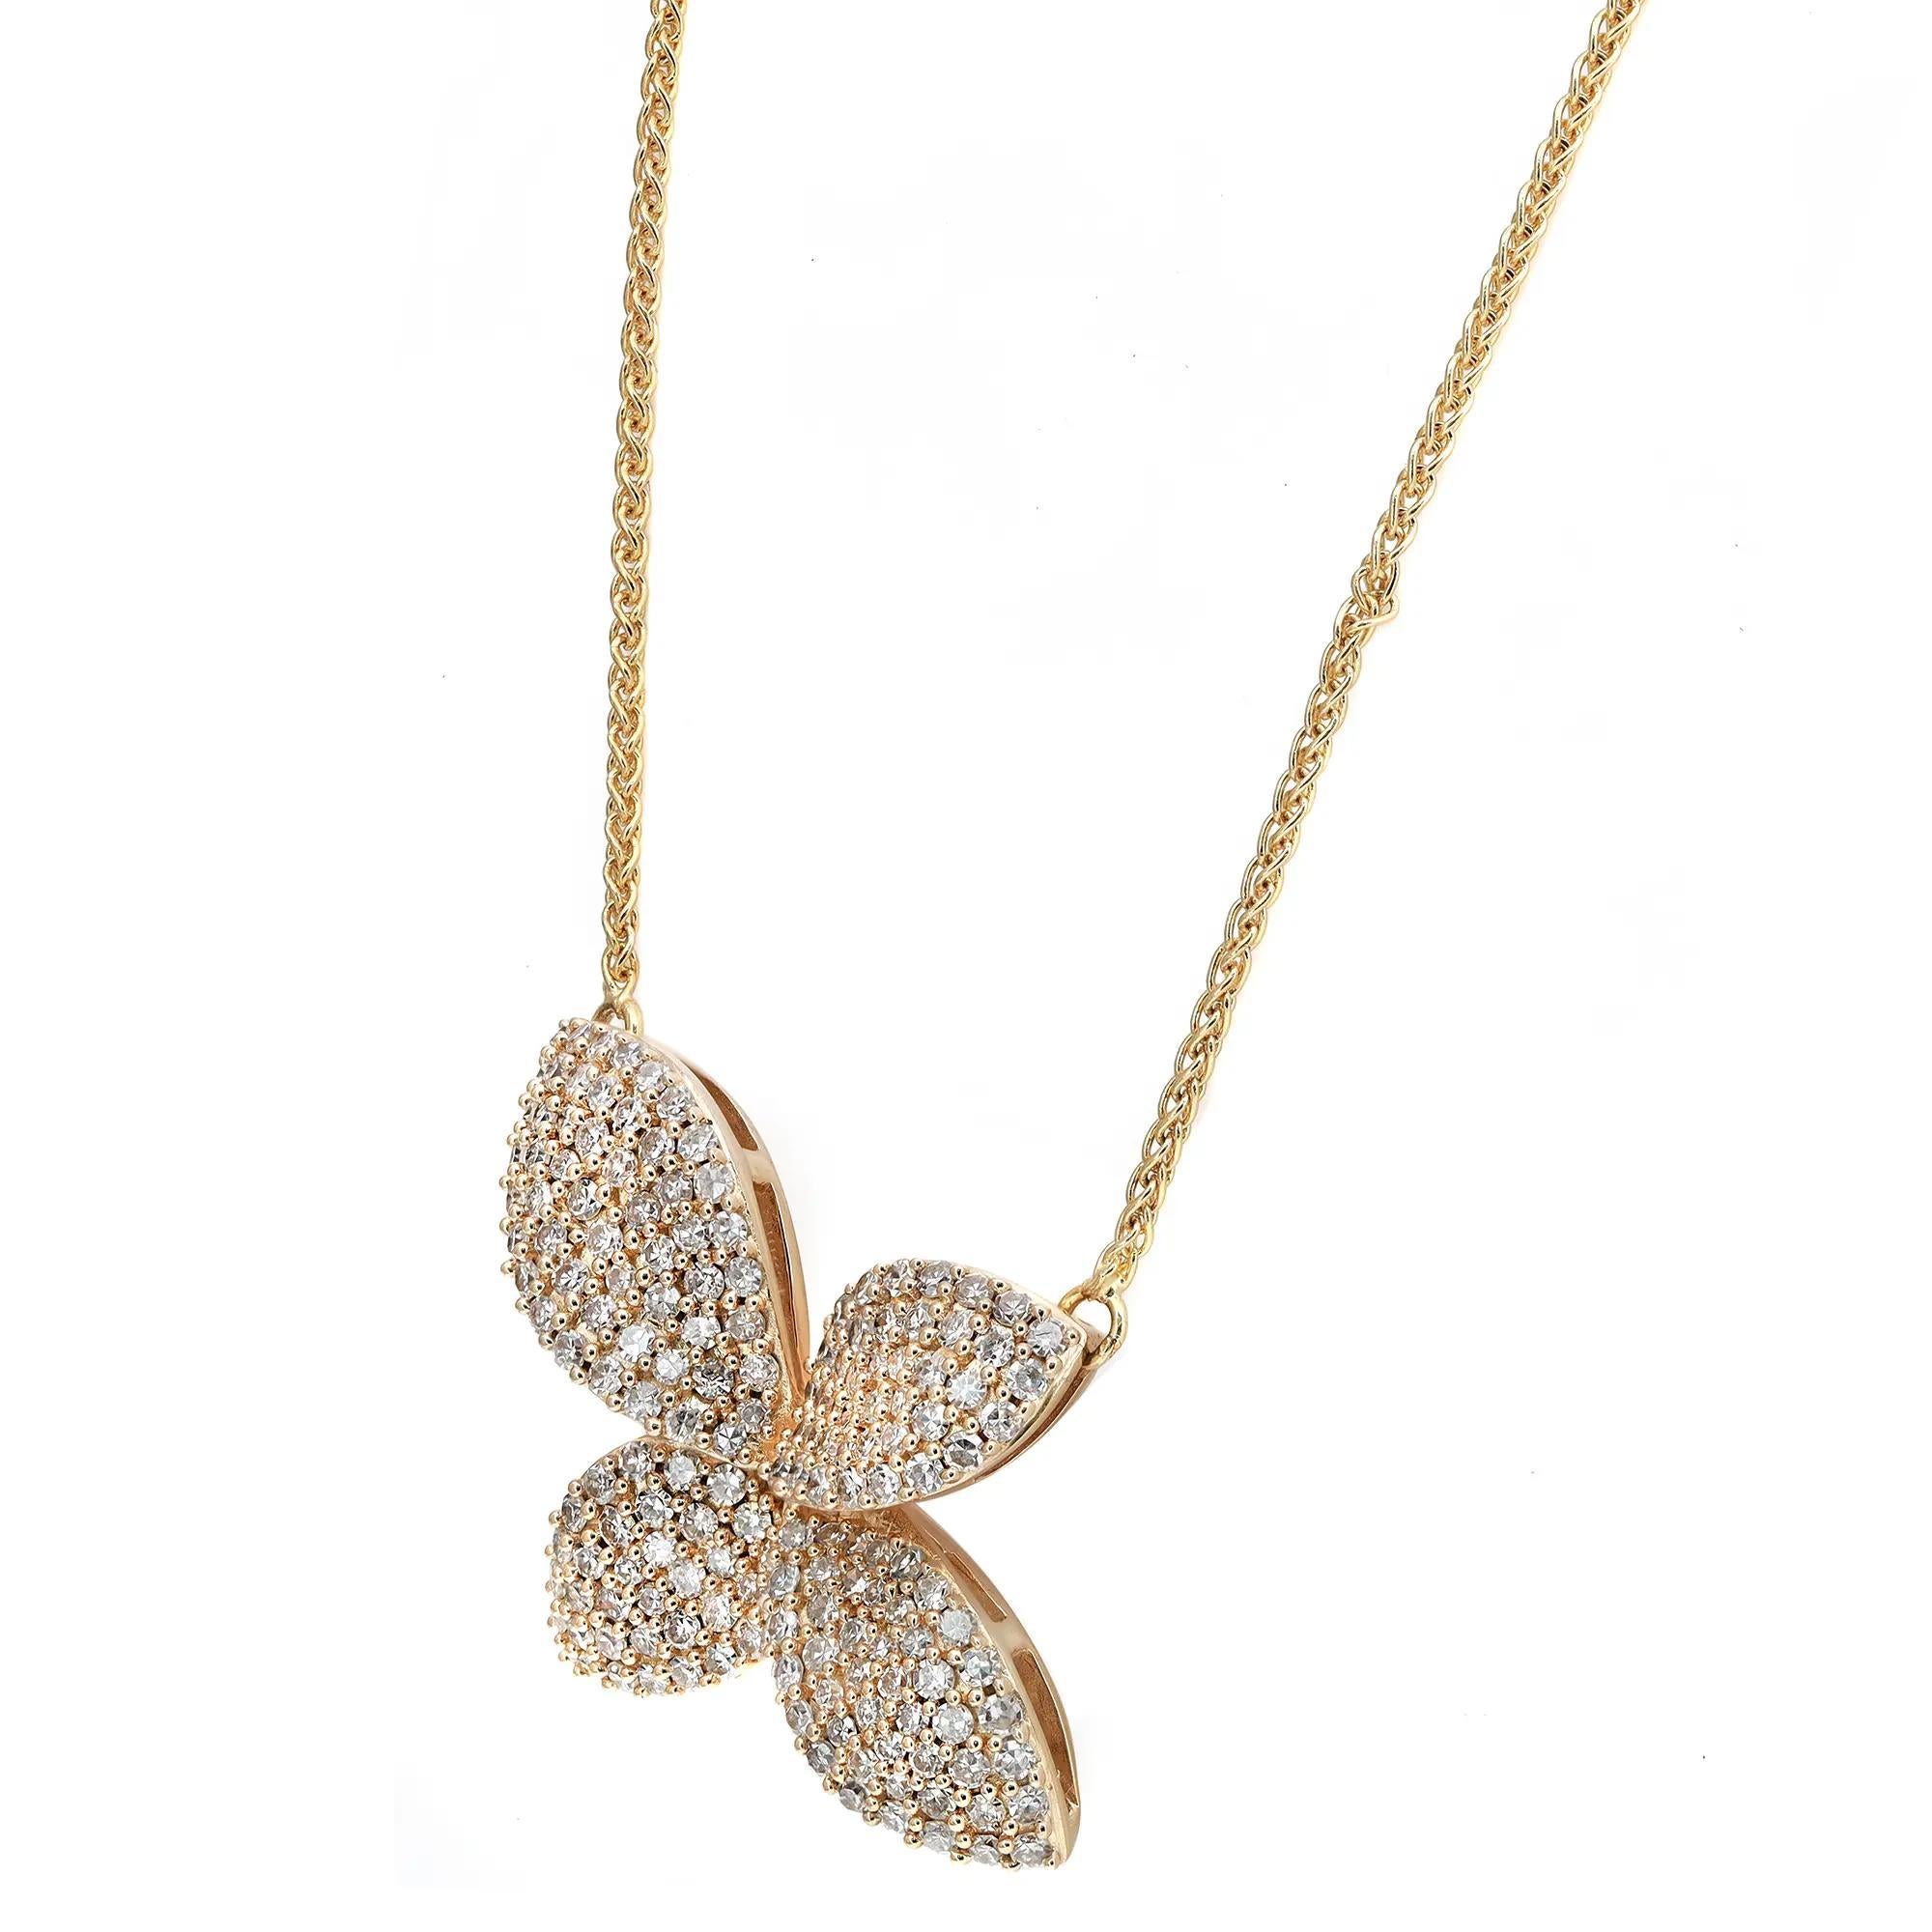 Fall in love with this beautiful flower pendant necklace. Crafted in 14K yellow gold. This pendant is a perfect gift for any occasion. It features a flower shaped pendant pave set with round brilliant cut diamonds weighing 1.00 carats. Diamond color